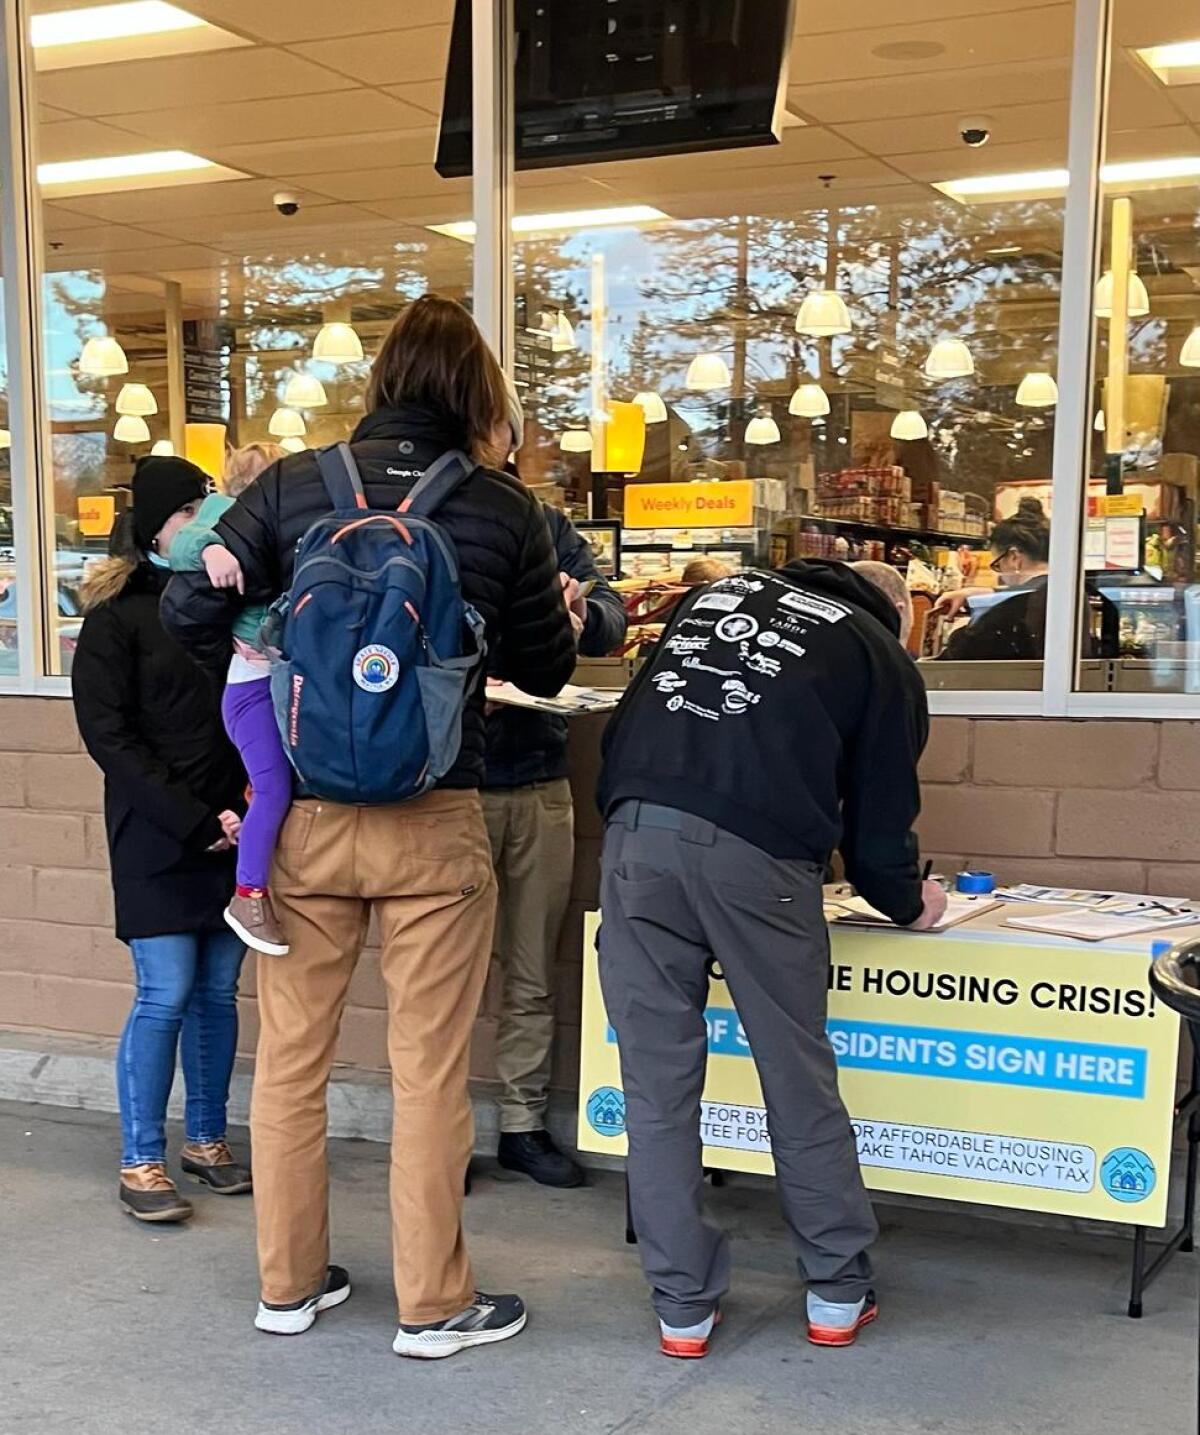 In South Lake Tahoe, locals for Affordable Housing collected more than 2,000 signatures to place a 